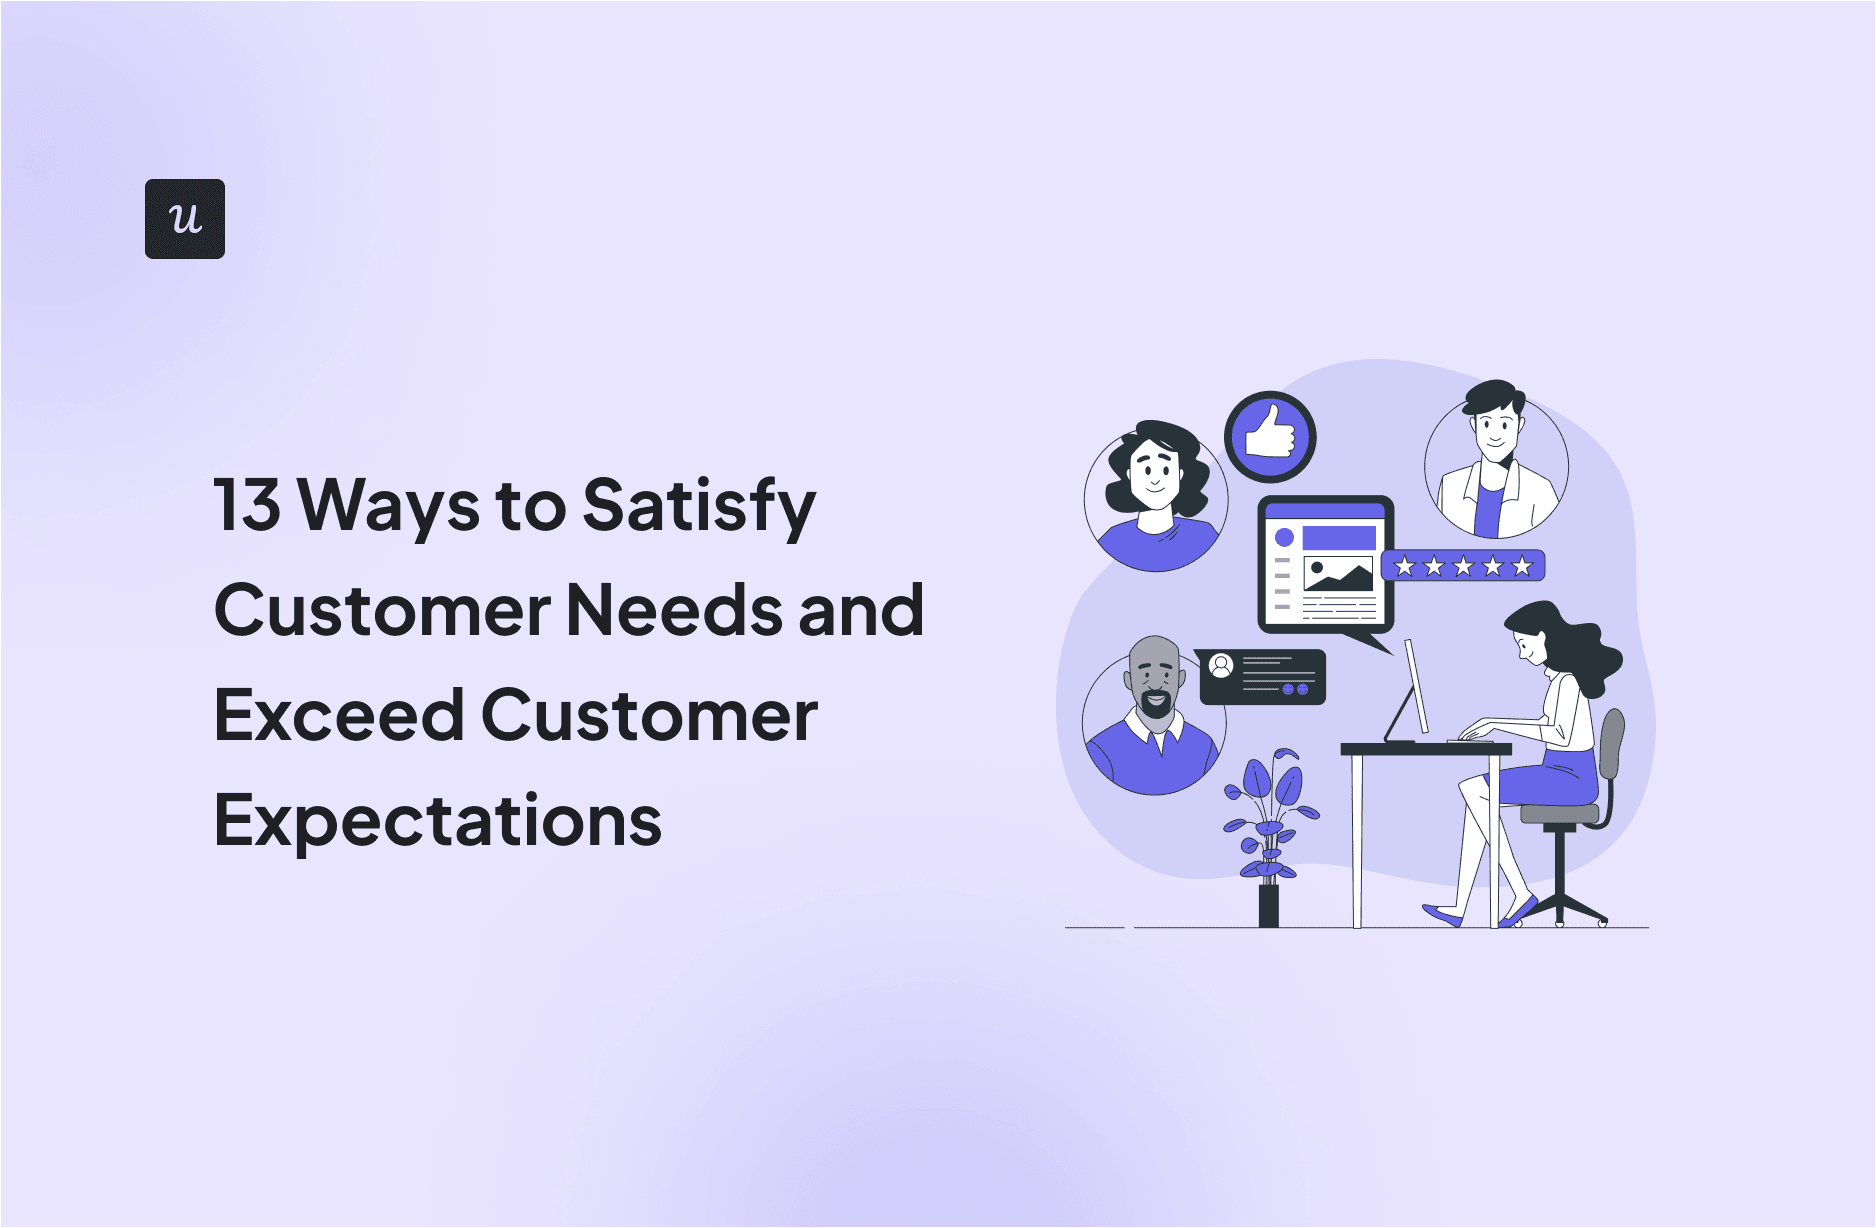 13 Ways to Satisfy Customer Needs and Exceed Customer Expectations cover